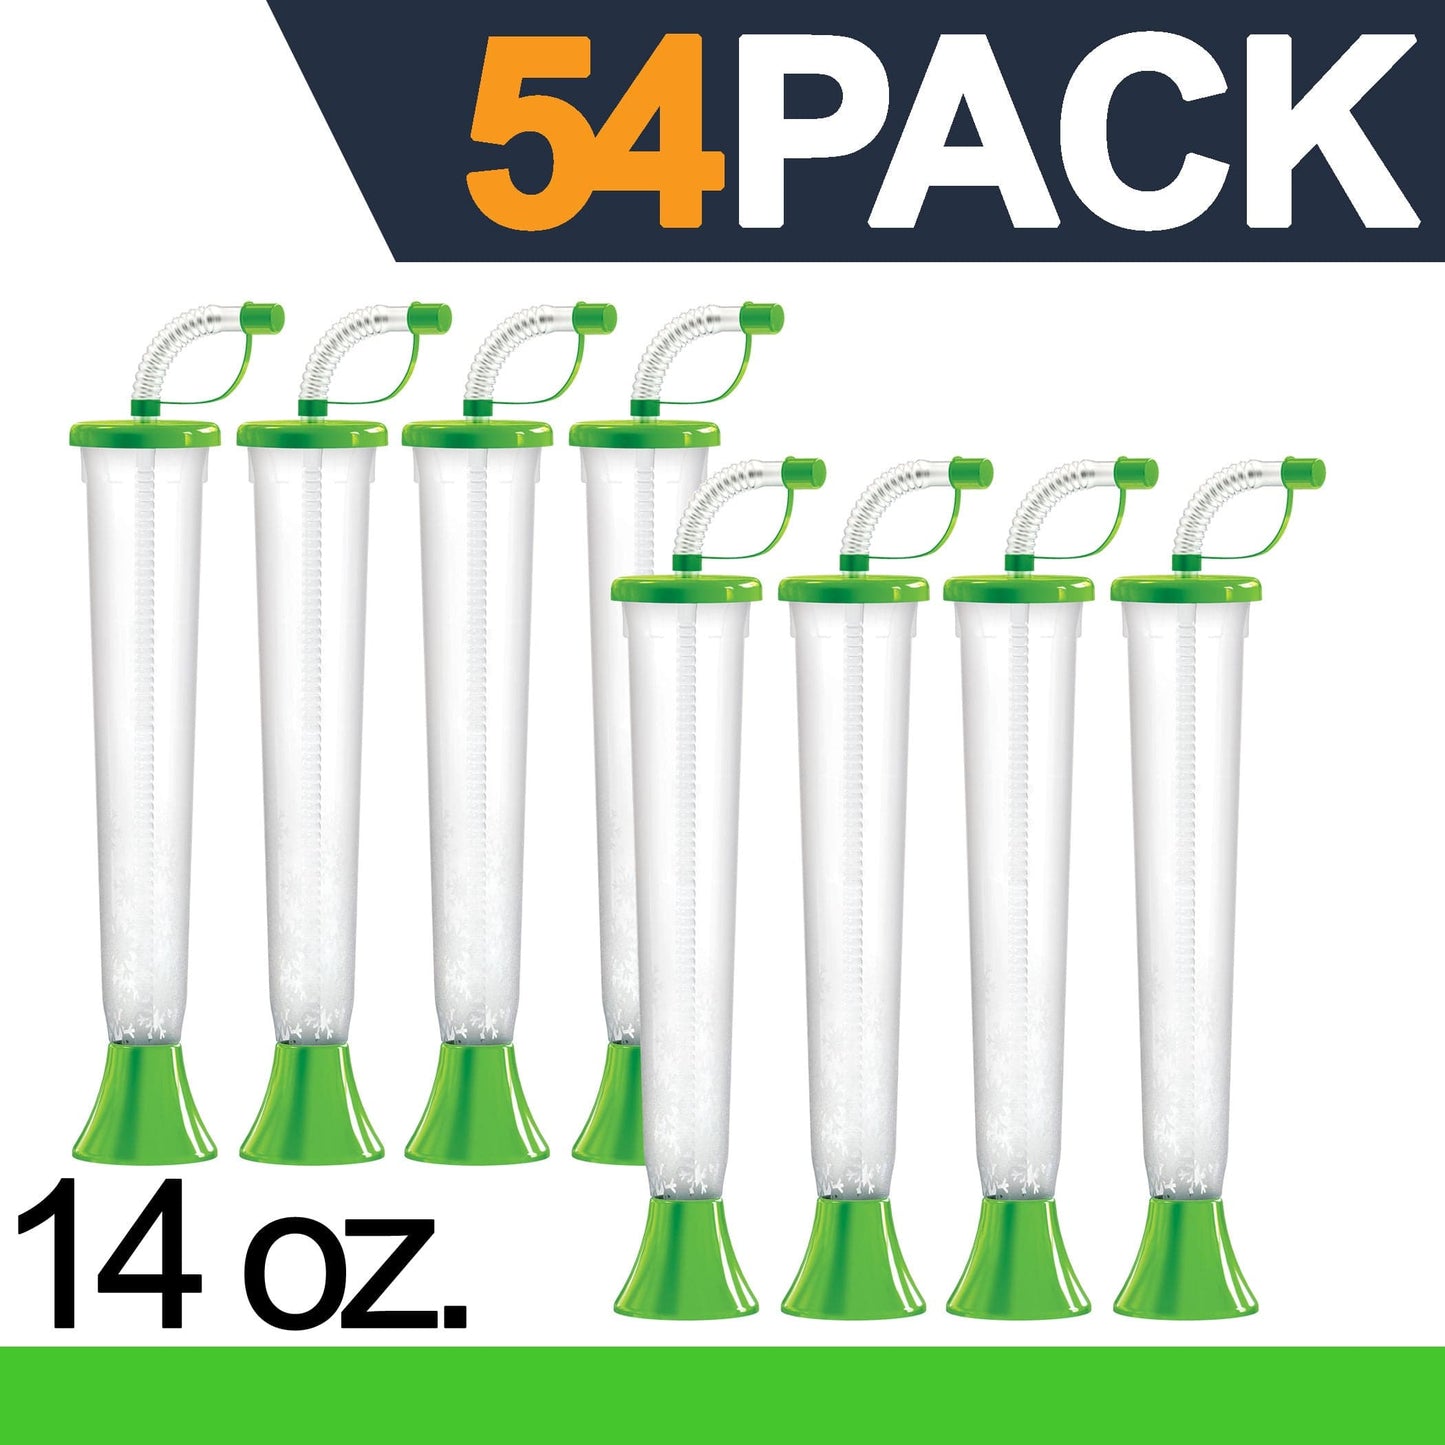 Sweet World USA Yard Cups 54 Cups Yard Cups with LIME Lids and Straws - for Margaritas, Cold and Frozen Drinks, Kids Party - 14 oz. (400 ml) cups with lids and straws